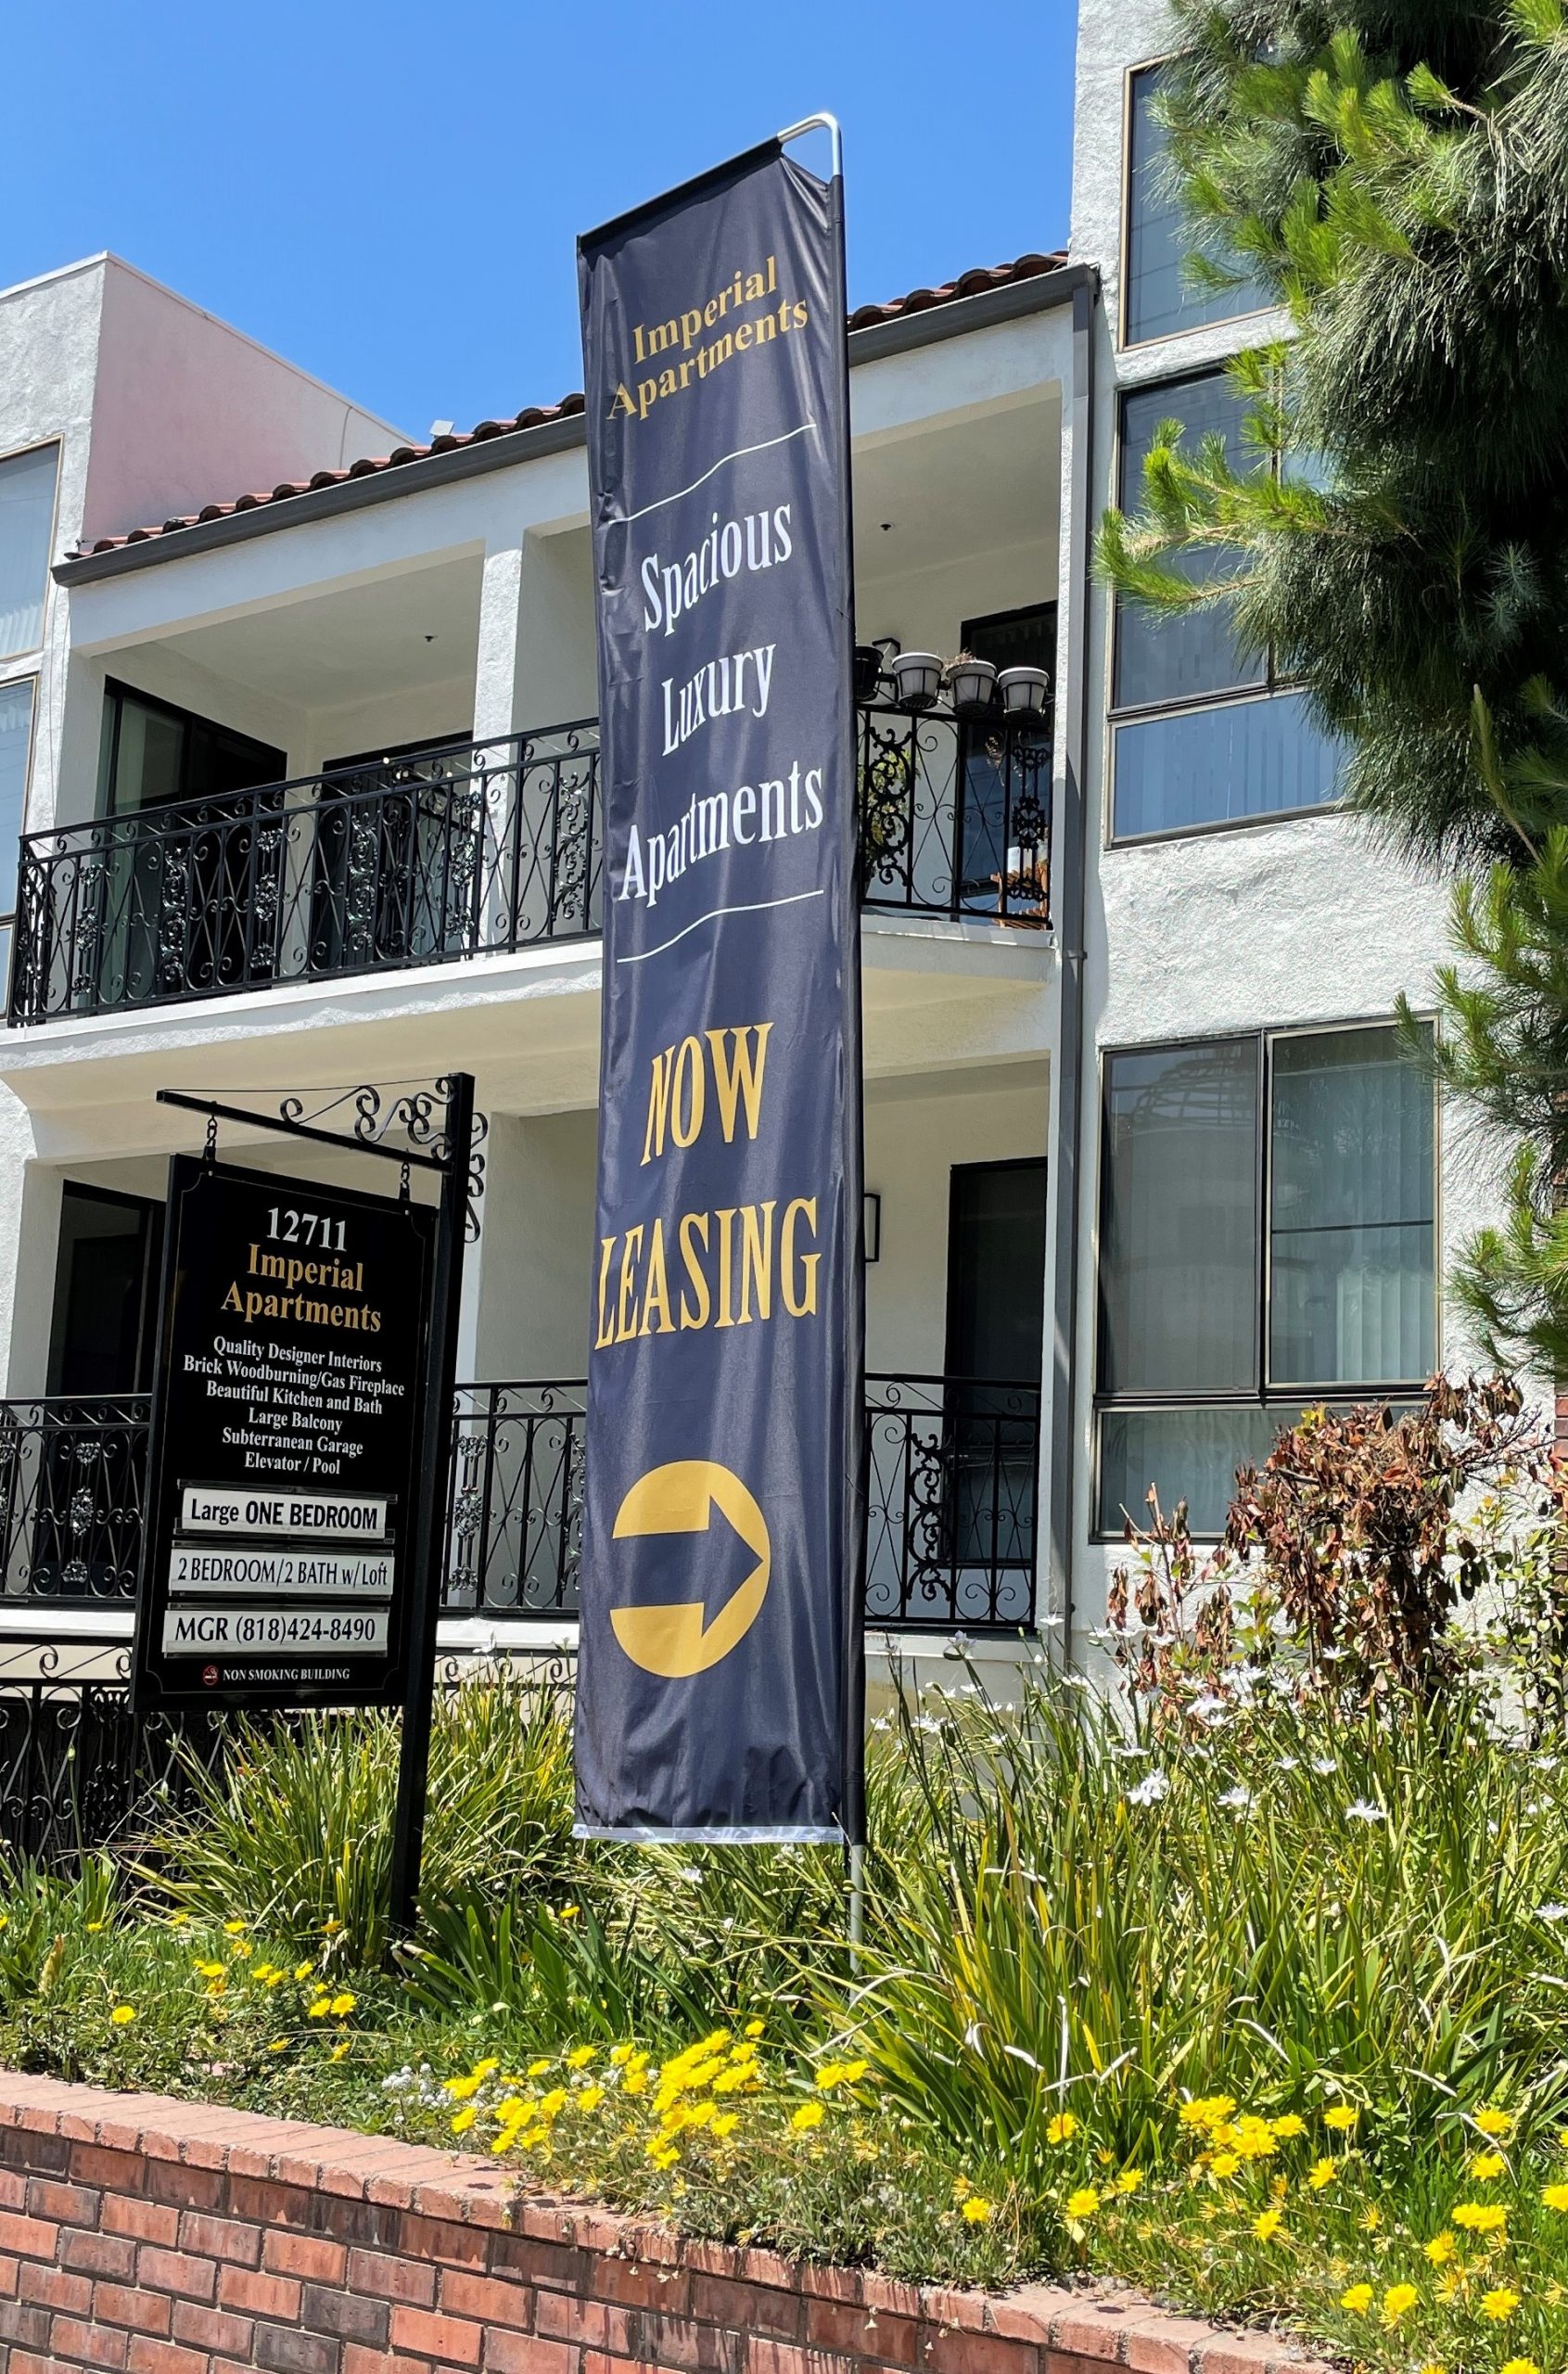 You are currently viewing Advertisement Banners for Imperial Apartments in Studio City